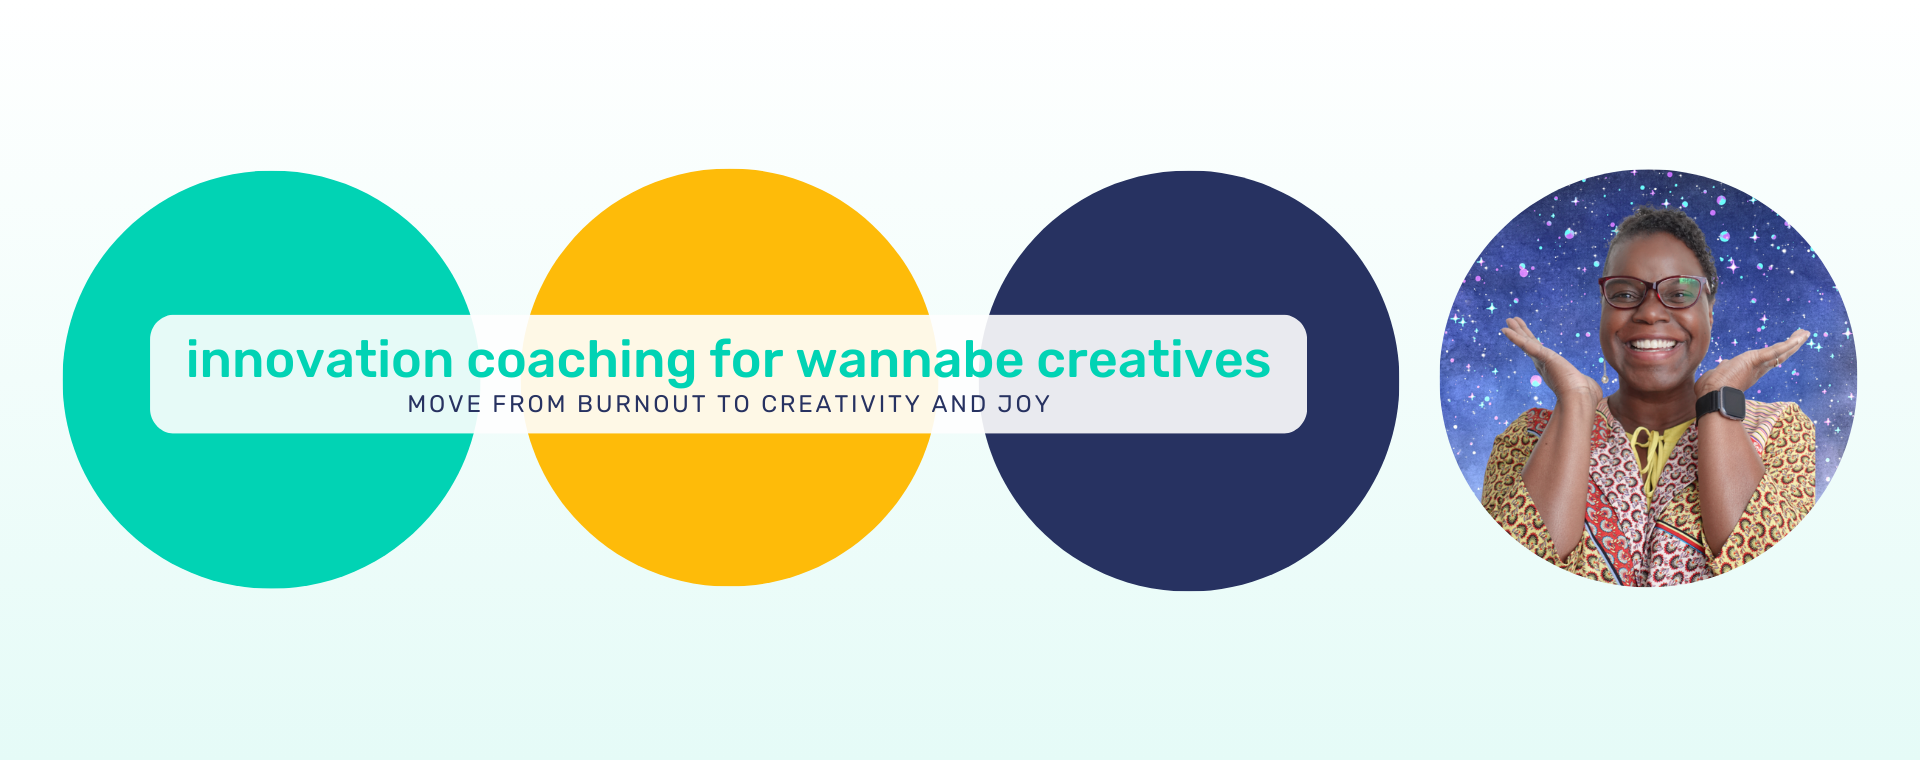 innovation coaching for wannabe creatives; move from burnout to creativity and joy